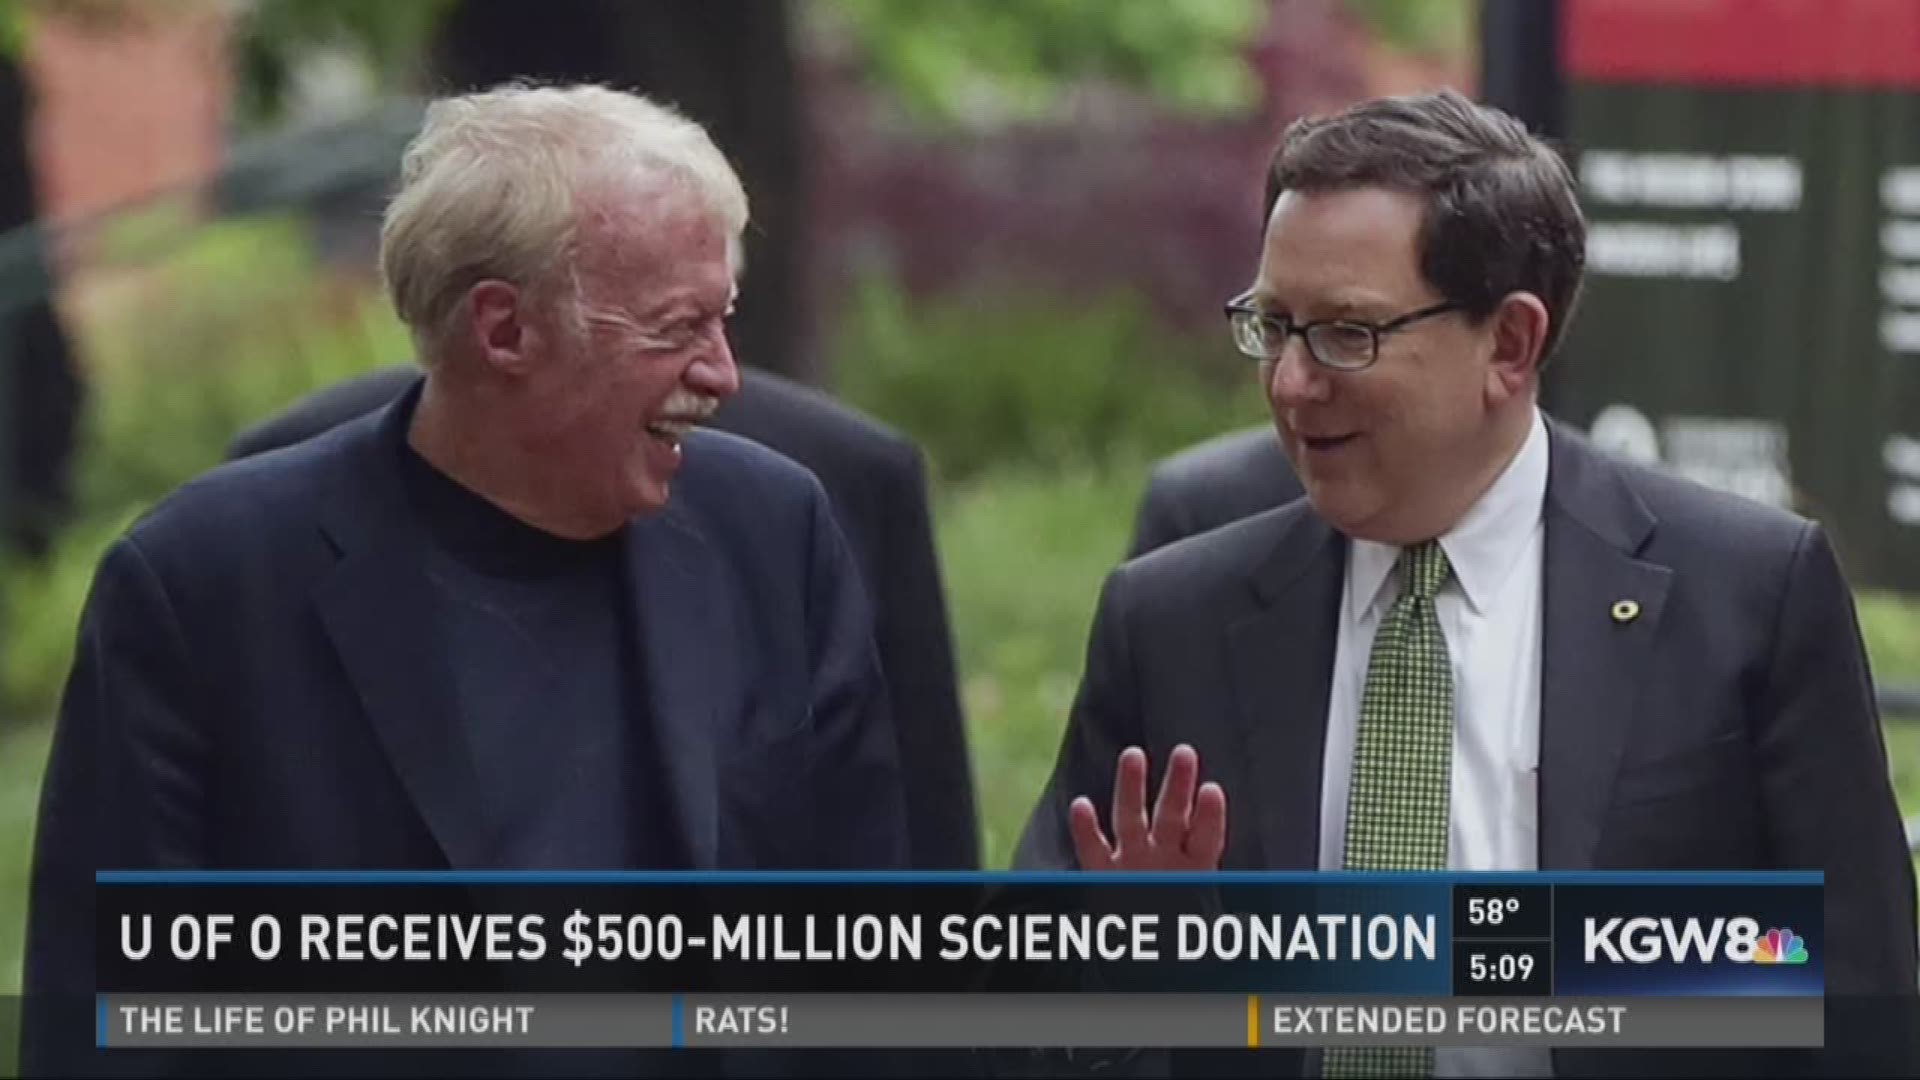 UO gets $500M donation from Phil Knight